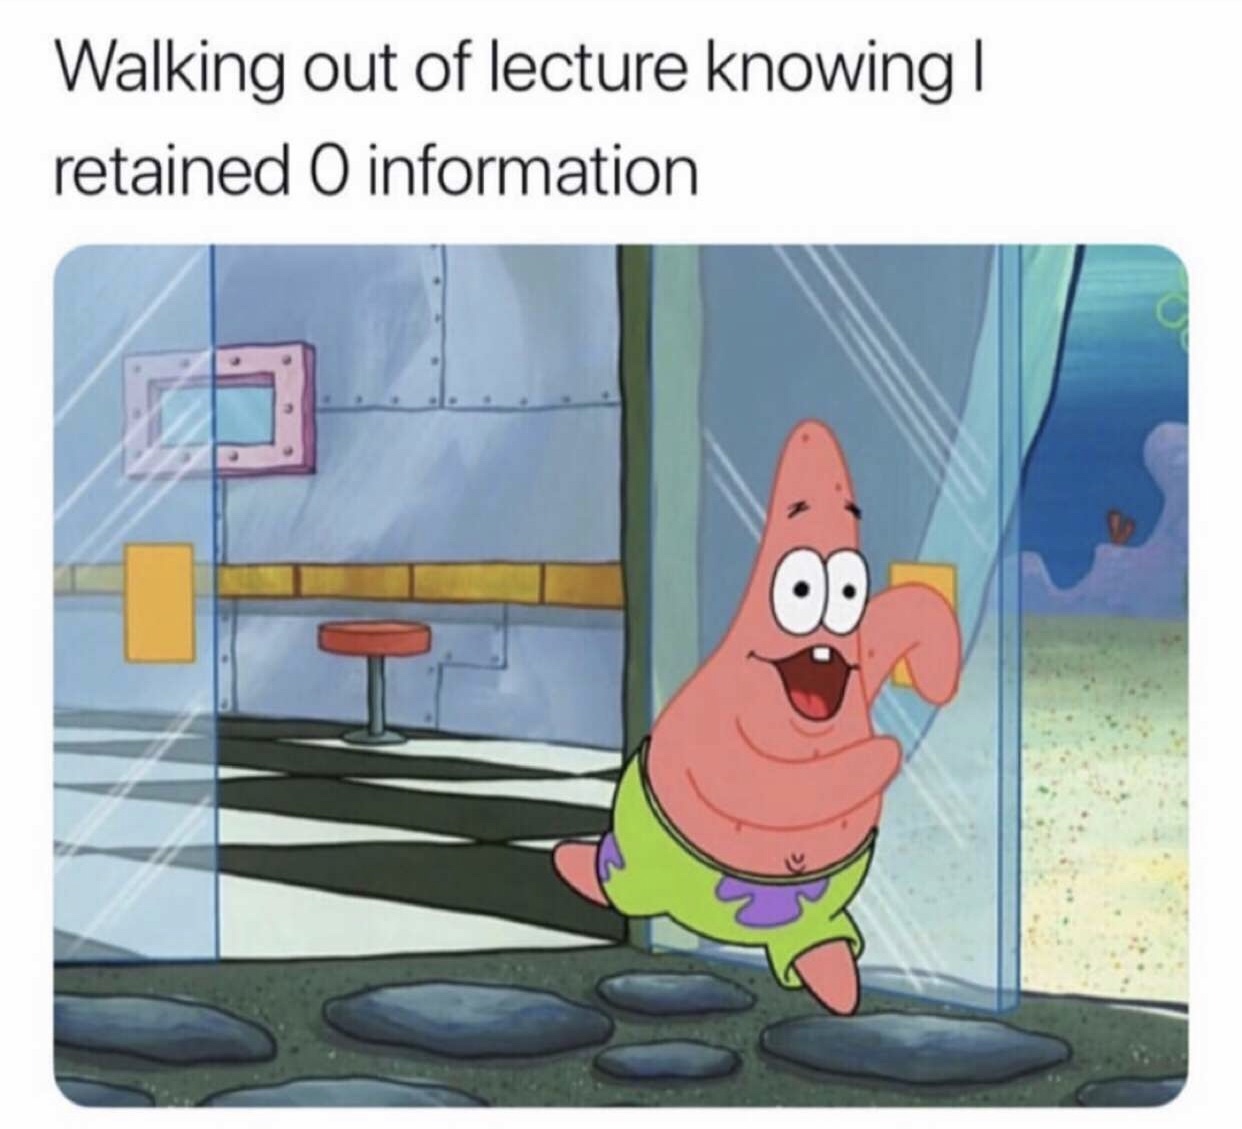 patrick star - Walking out of lecture knowing| retained O information